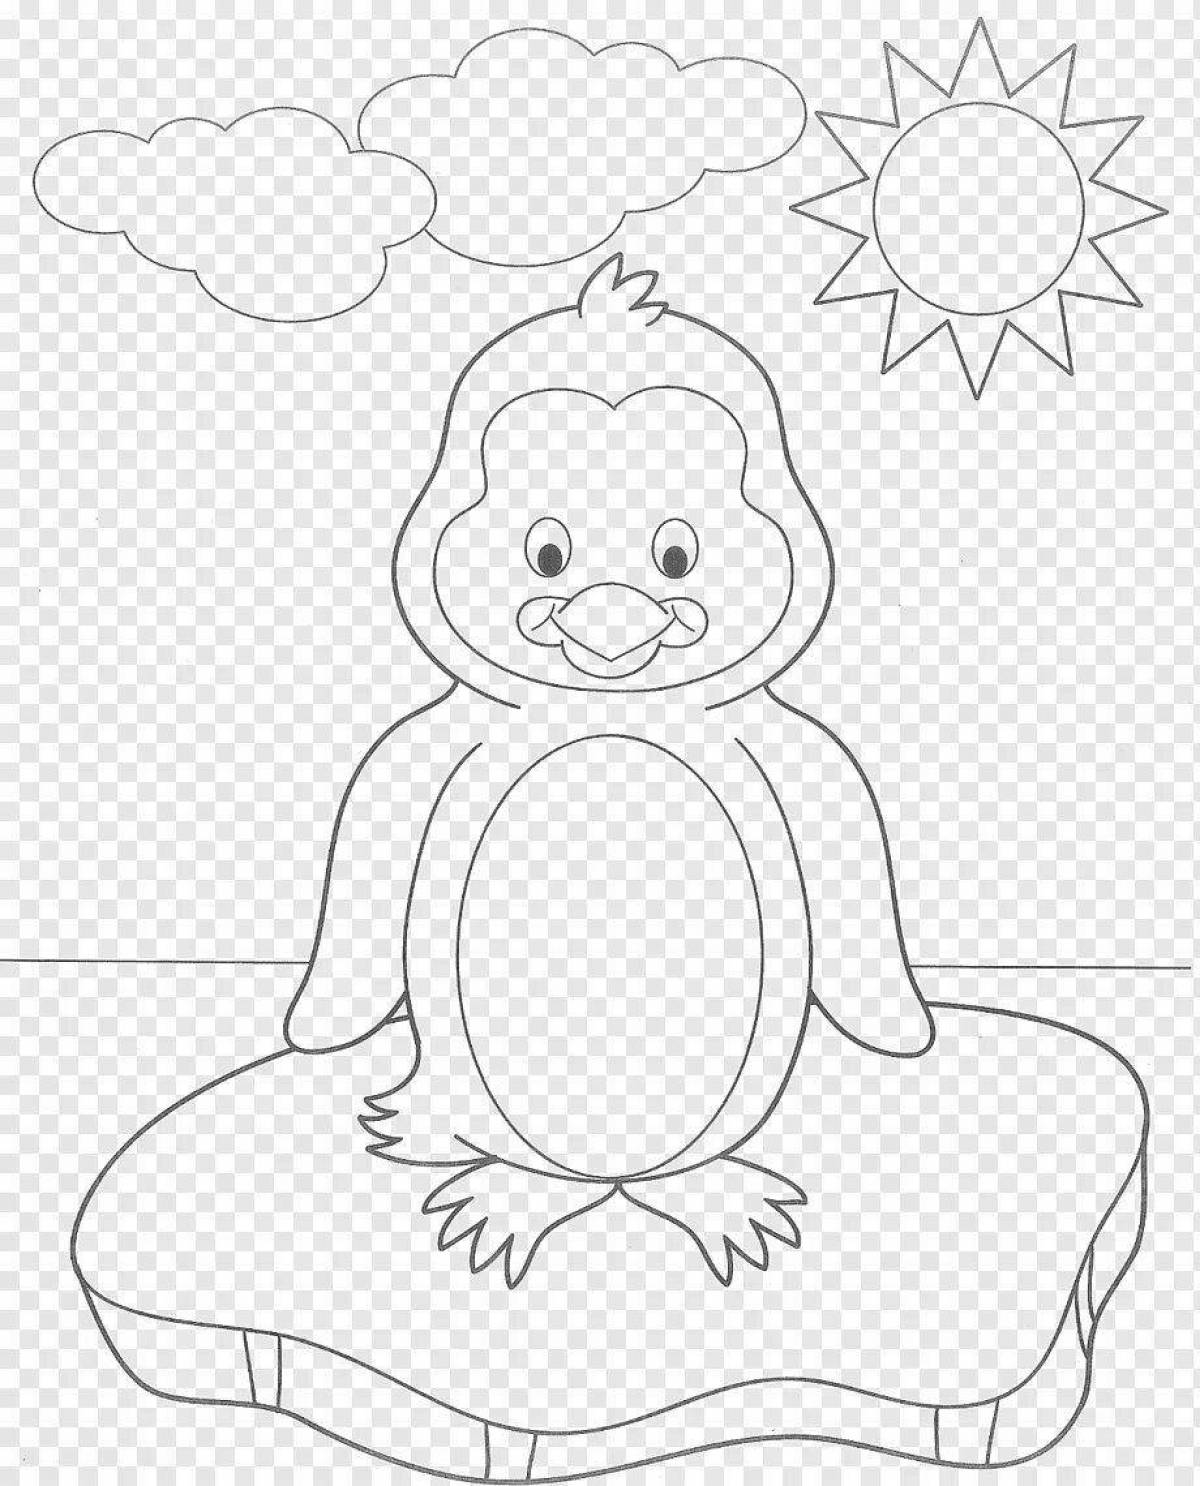 Coloring page of a wild little penguin